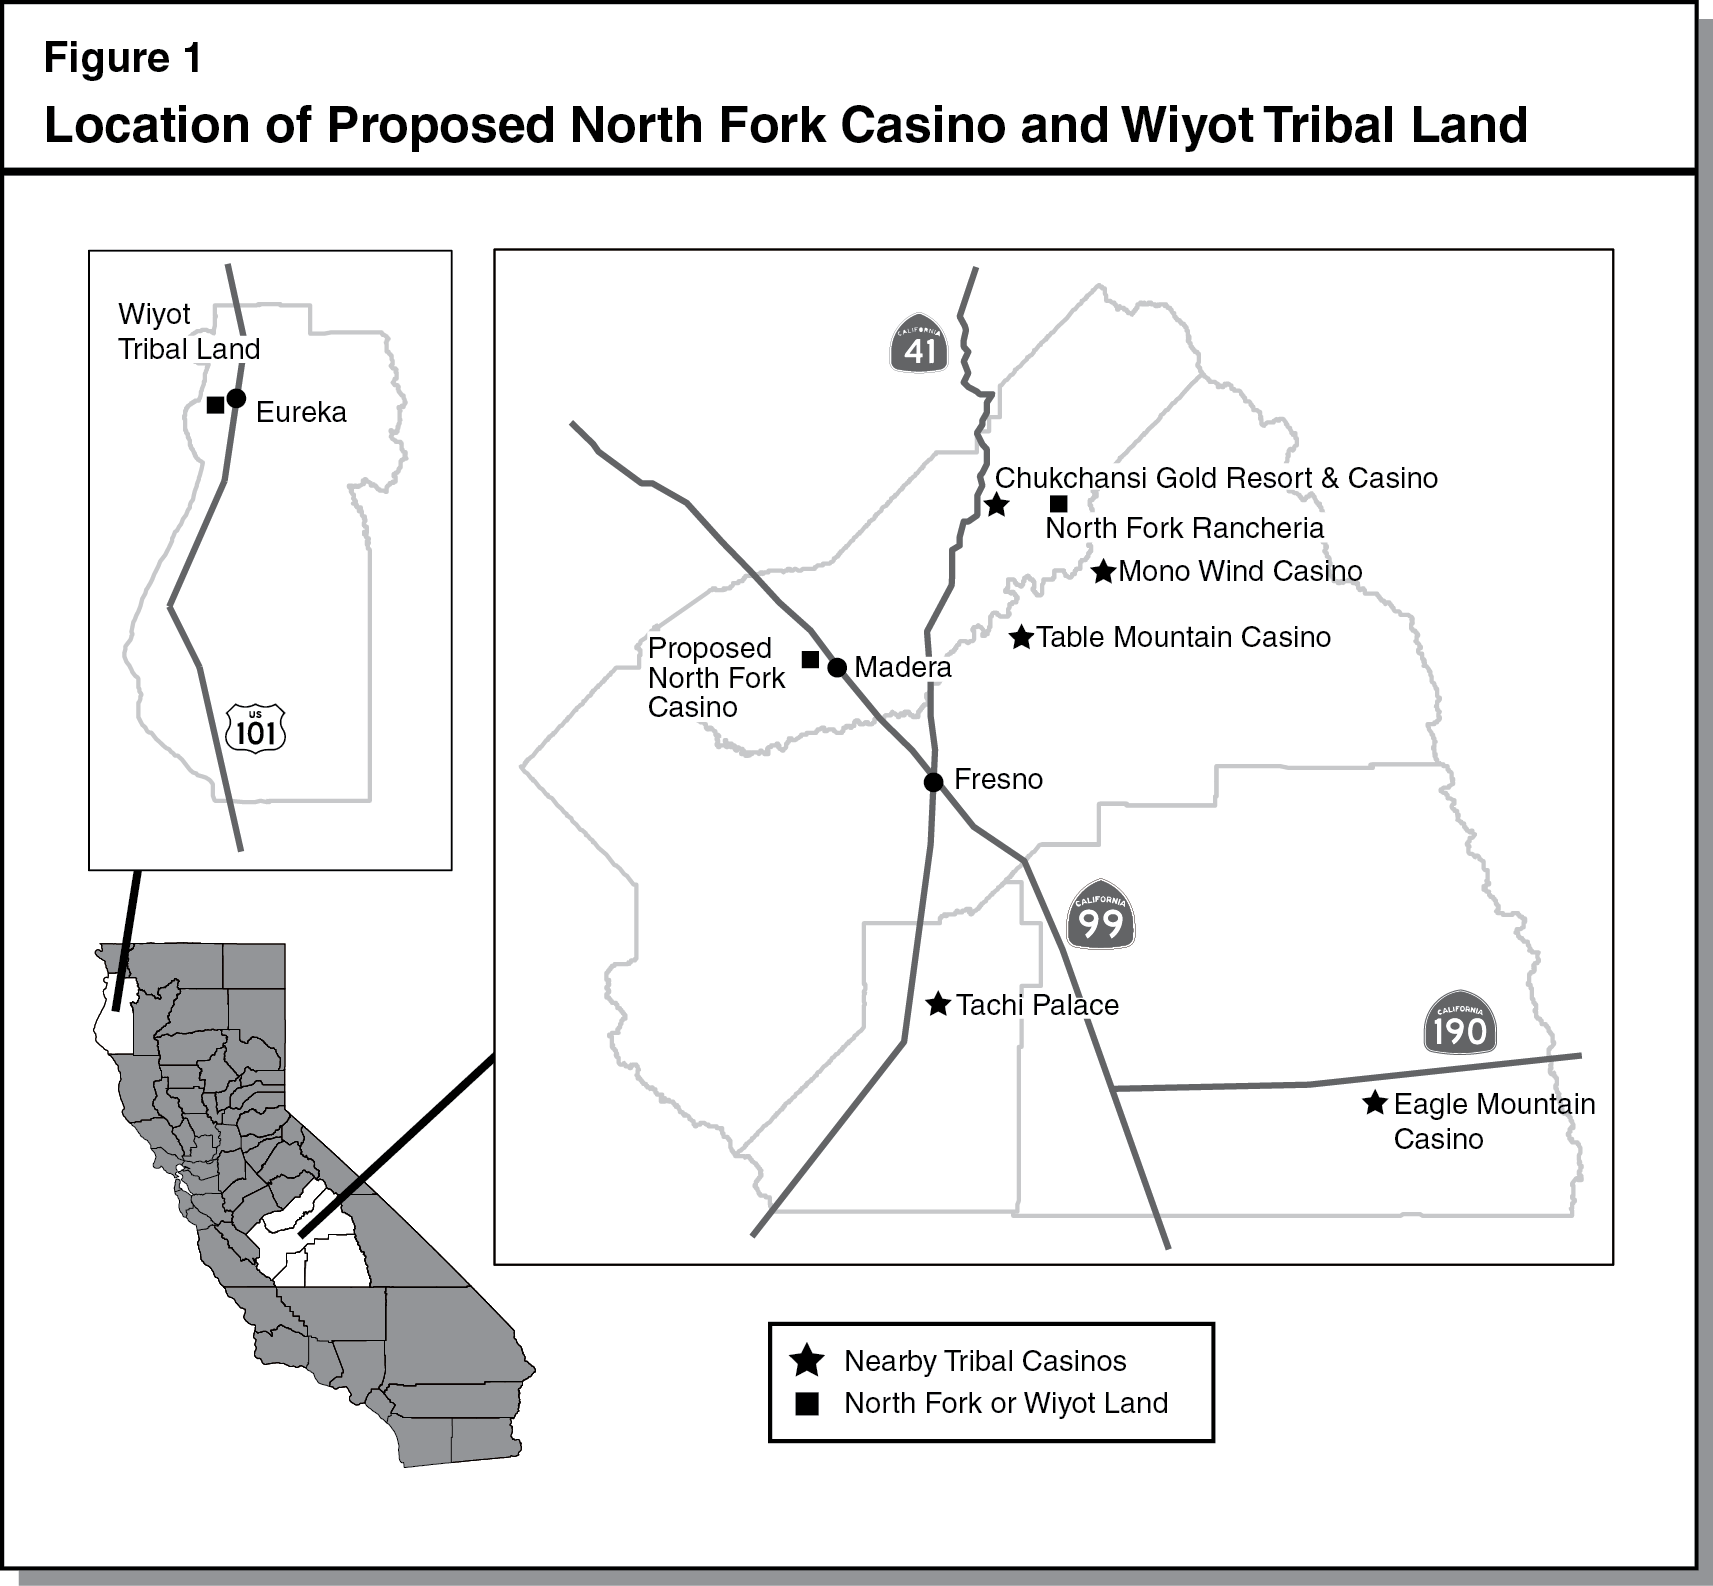 Location of Proposed North Fork Casino and Wiyot Tribal Land